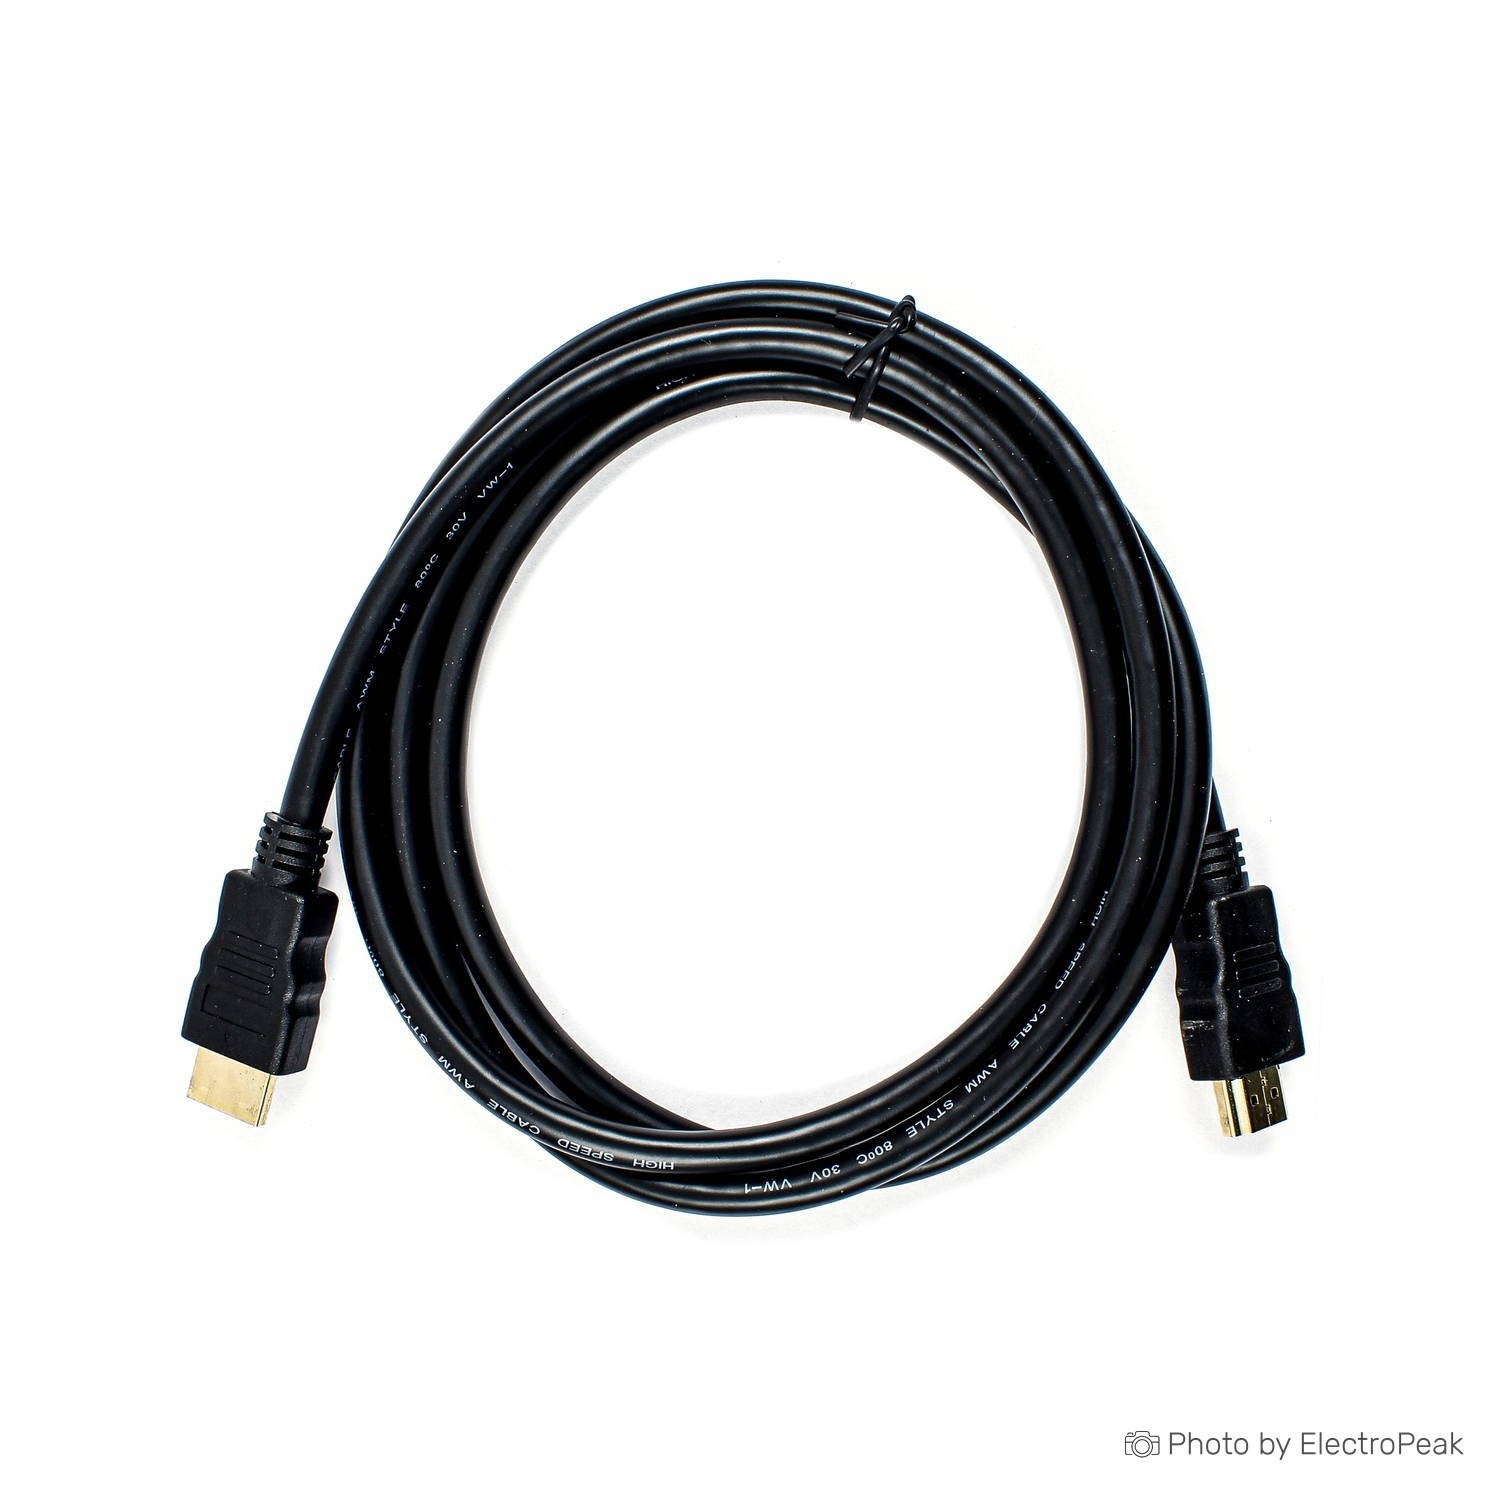 Buy Micro HDMI to HDMI Cable - 1m at Best Price - ElectroPeak